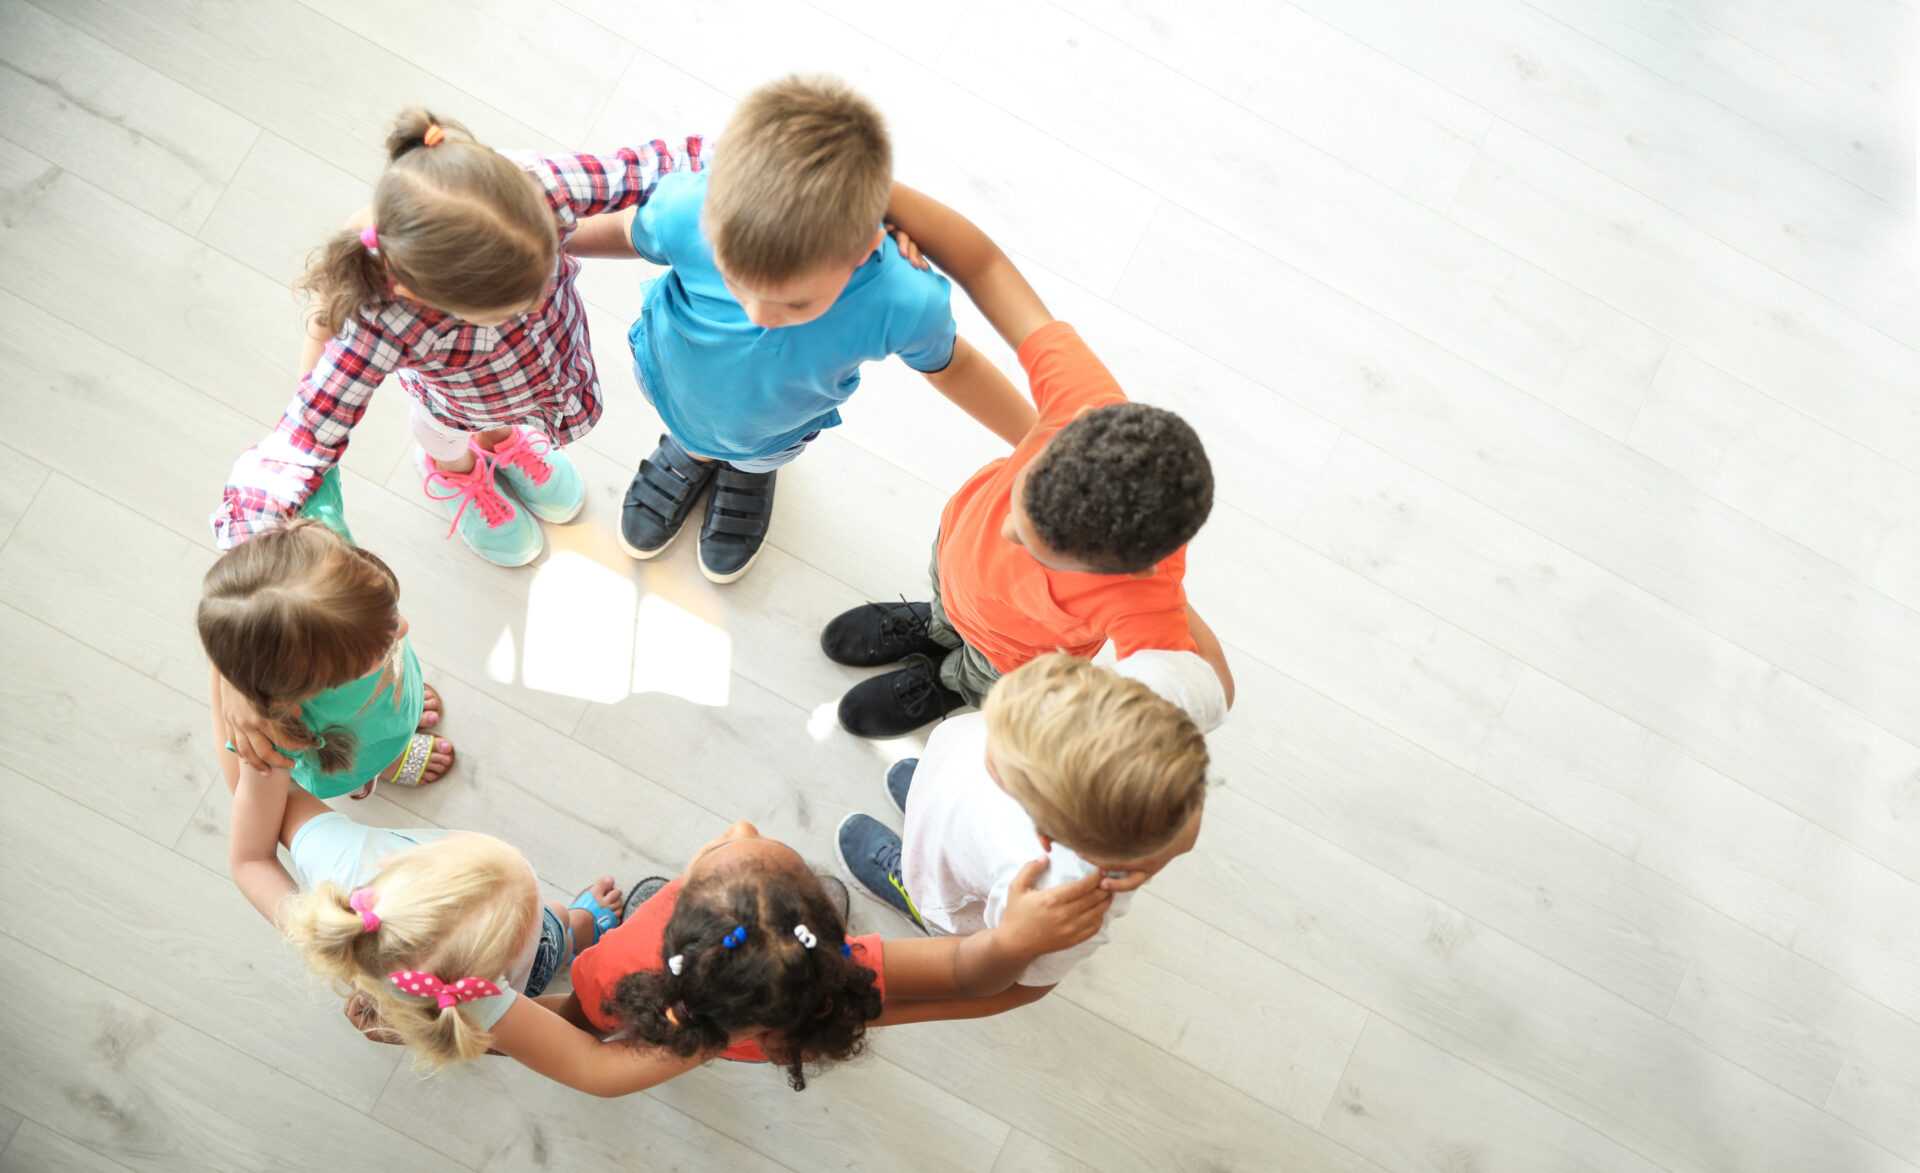 Little children making circle with hands around each other indoors, top view.